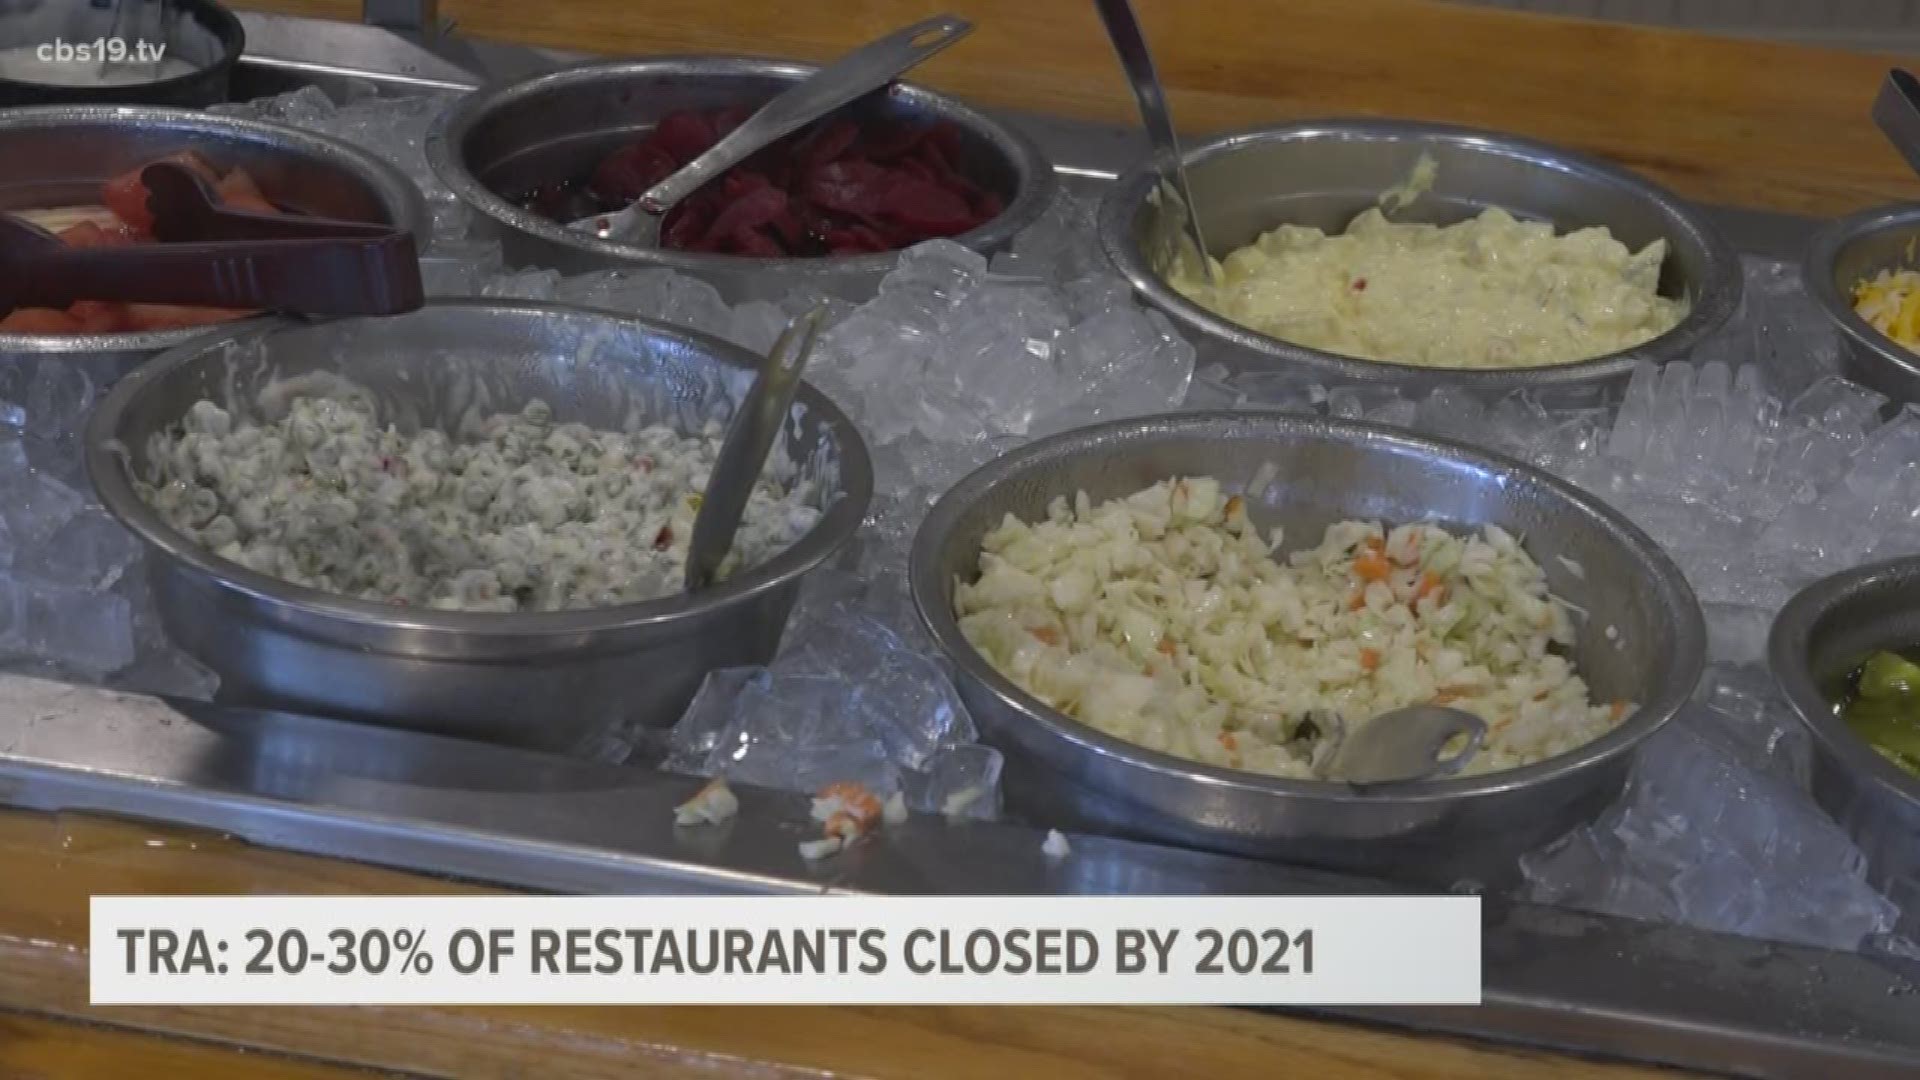 TRA estimates that 20-30% of East Texas restaurants could shut down by the end of the year due to the pandemic.